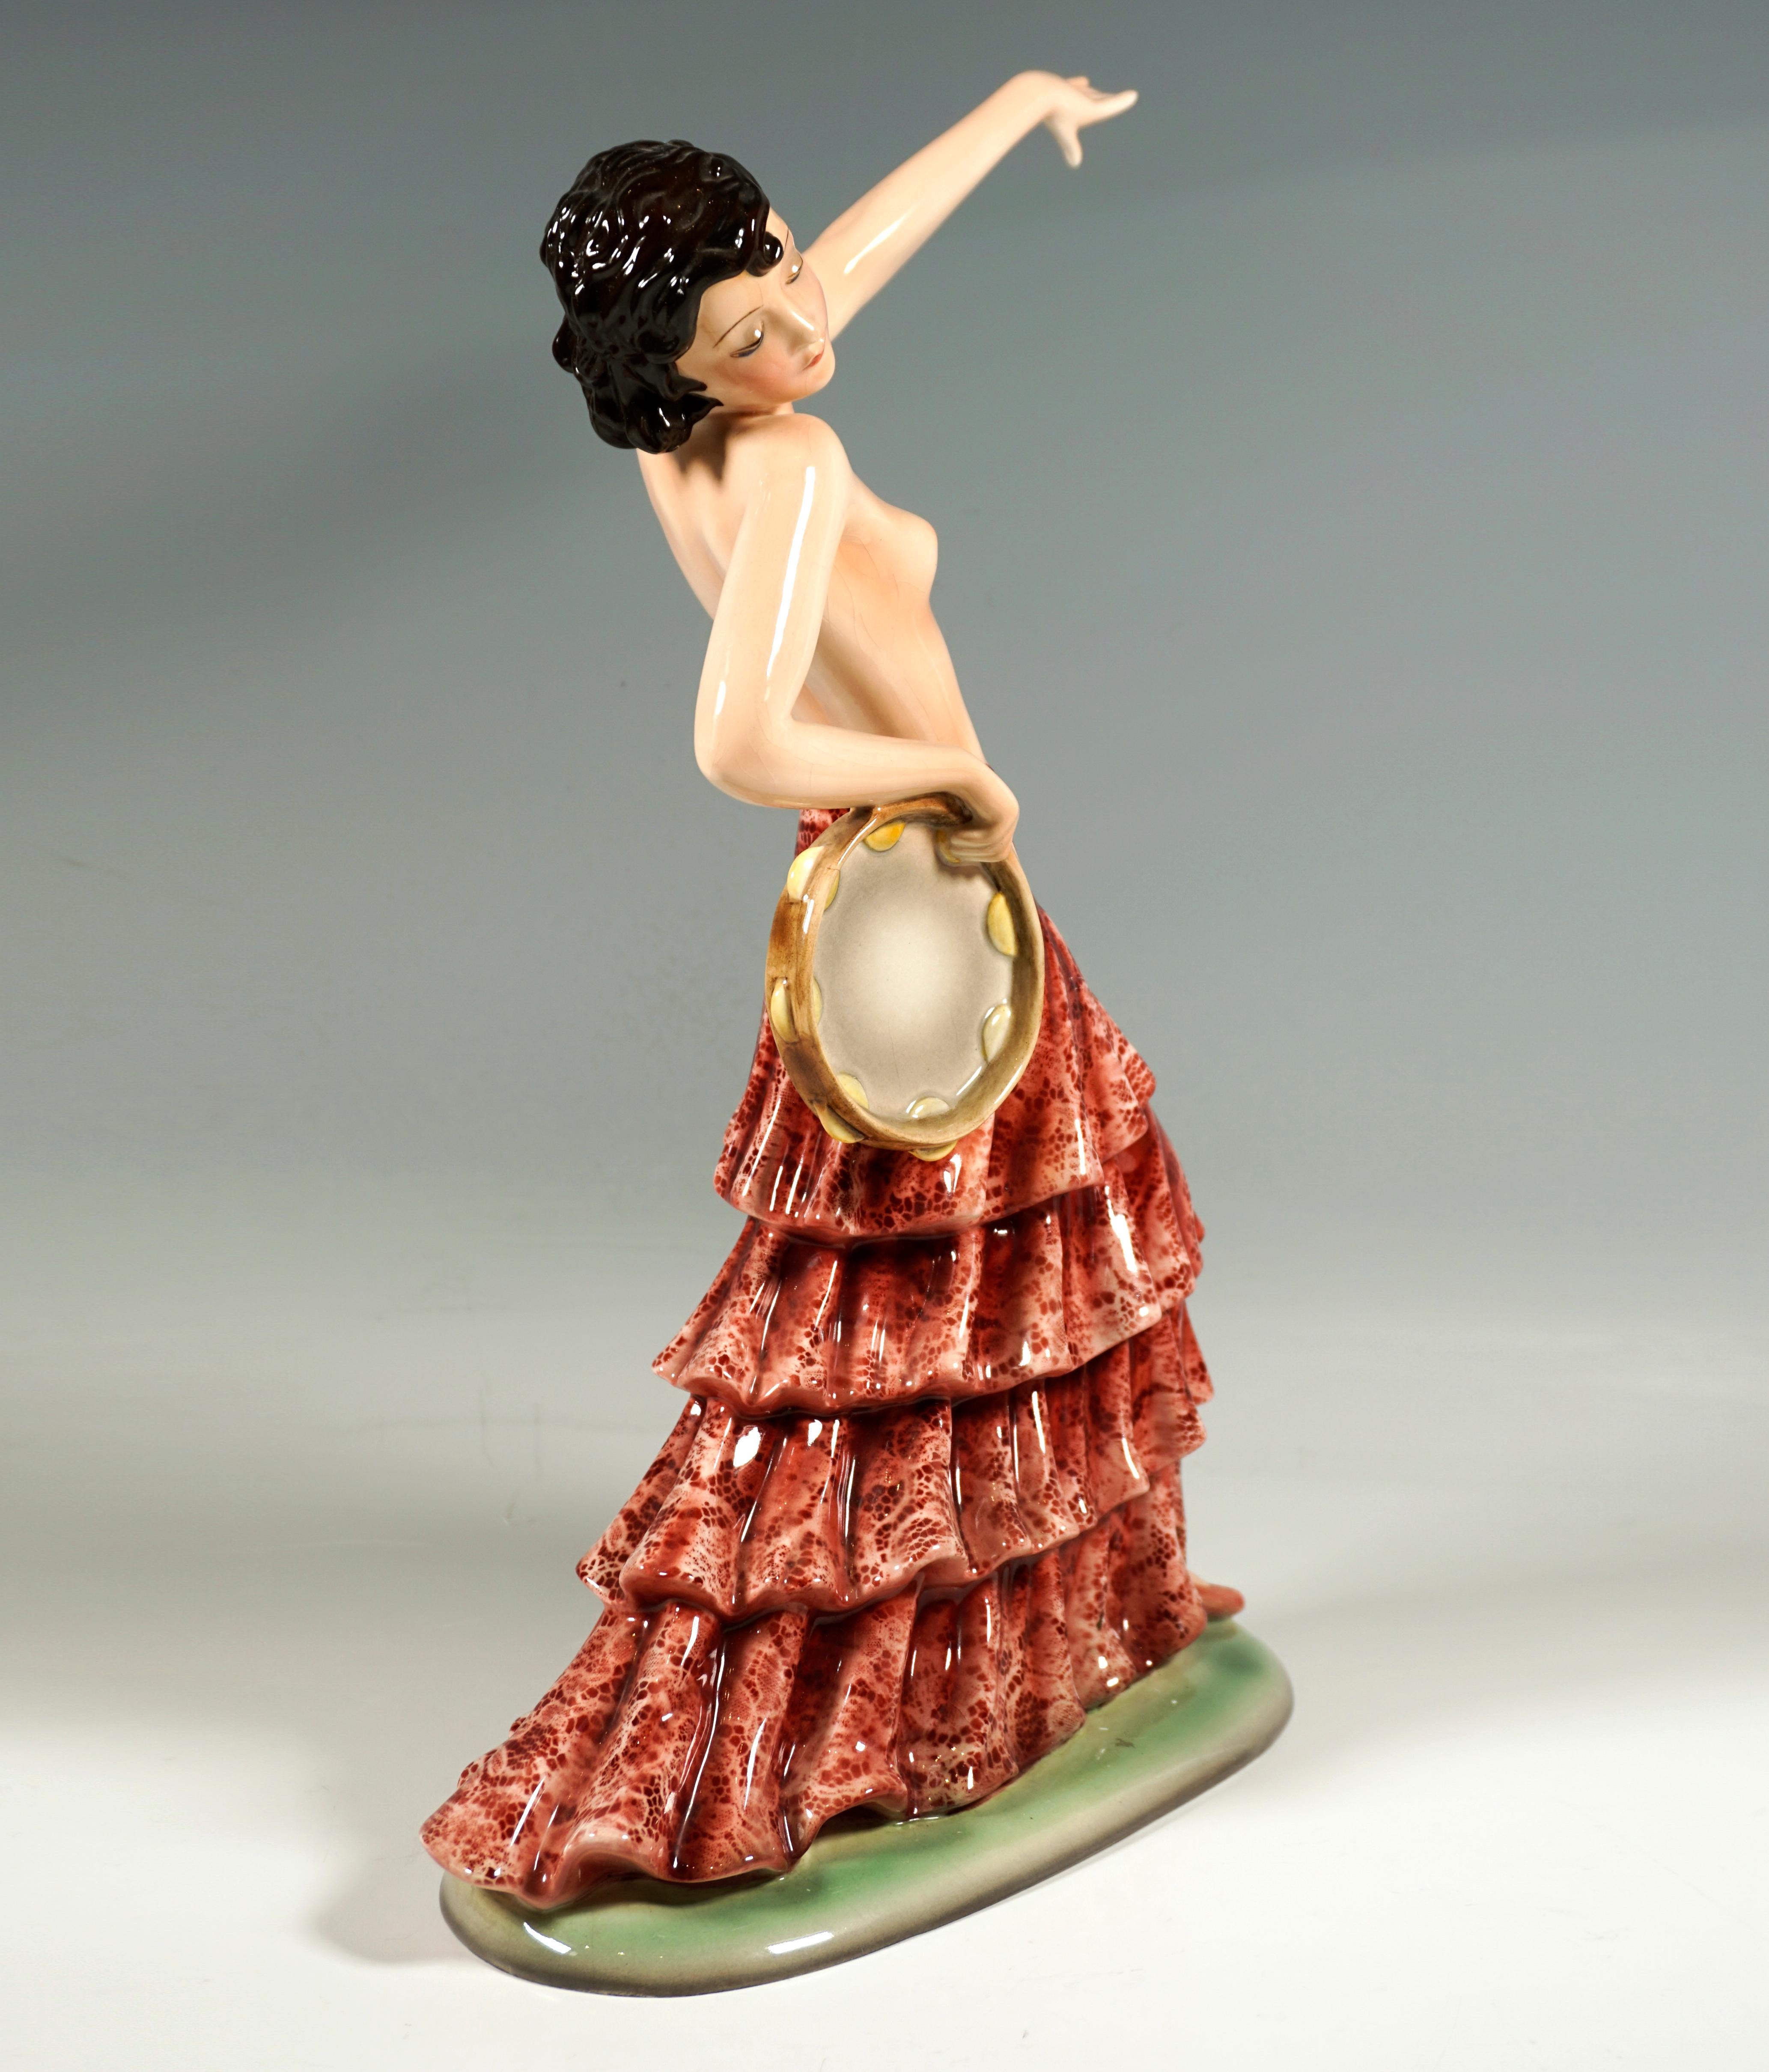 Delicate Goldscheider Art Ceramics Figurine Of The 1930s:
Flamenco dancer with chin-length hair, dressed only in a floor-length, red flounced lace skirt and shoes, turning her head to the right and looking at the ground, in a striding pose with her